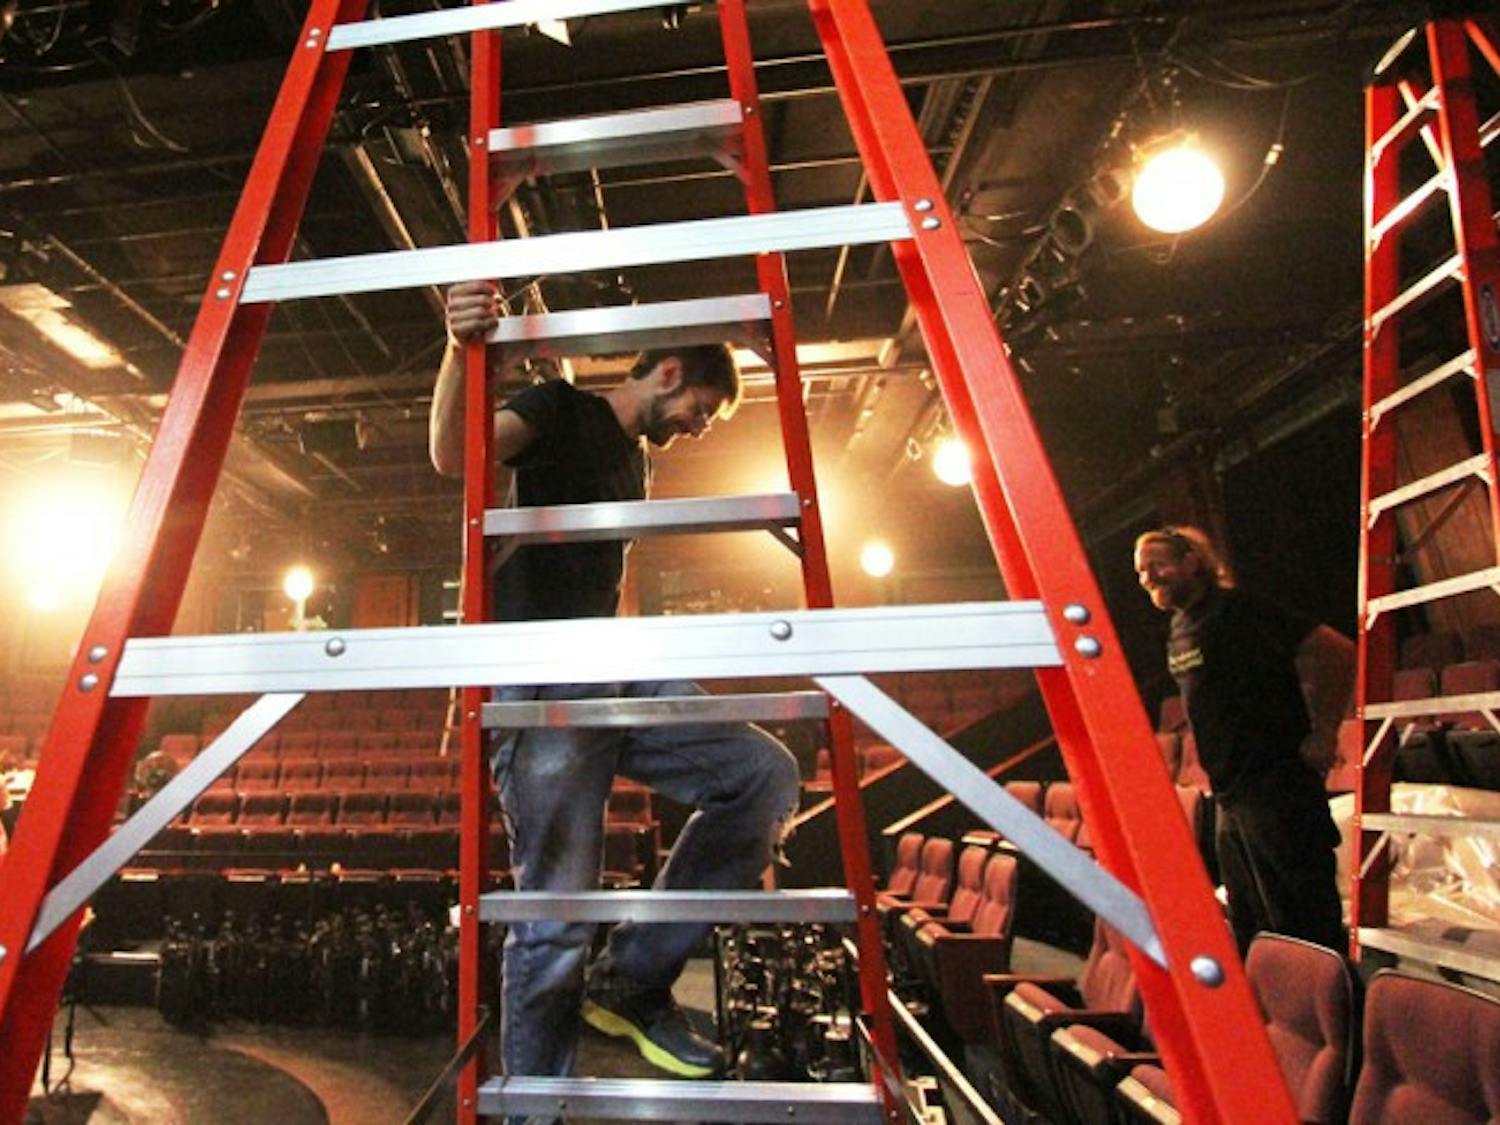 Josh Allen, 27, (left) and Nelson Isaac, 41, (right) work on lighting for the upcoming show “Carrie” at the Hippodrome State Theatre on Monday.